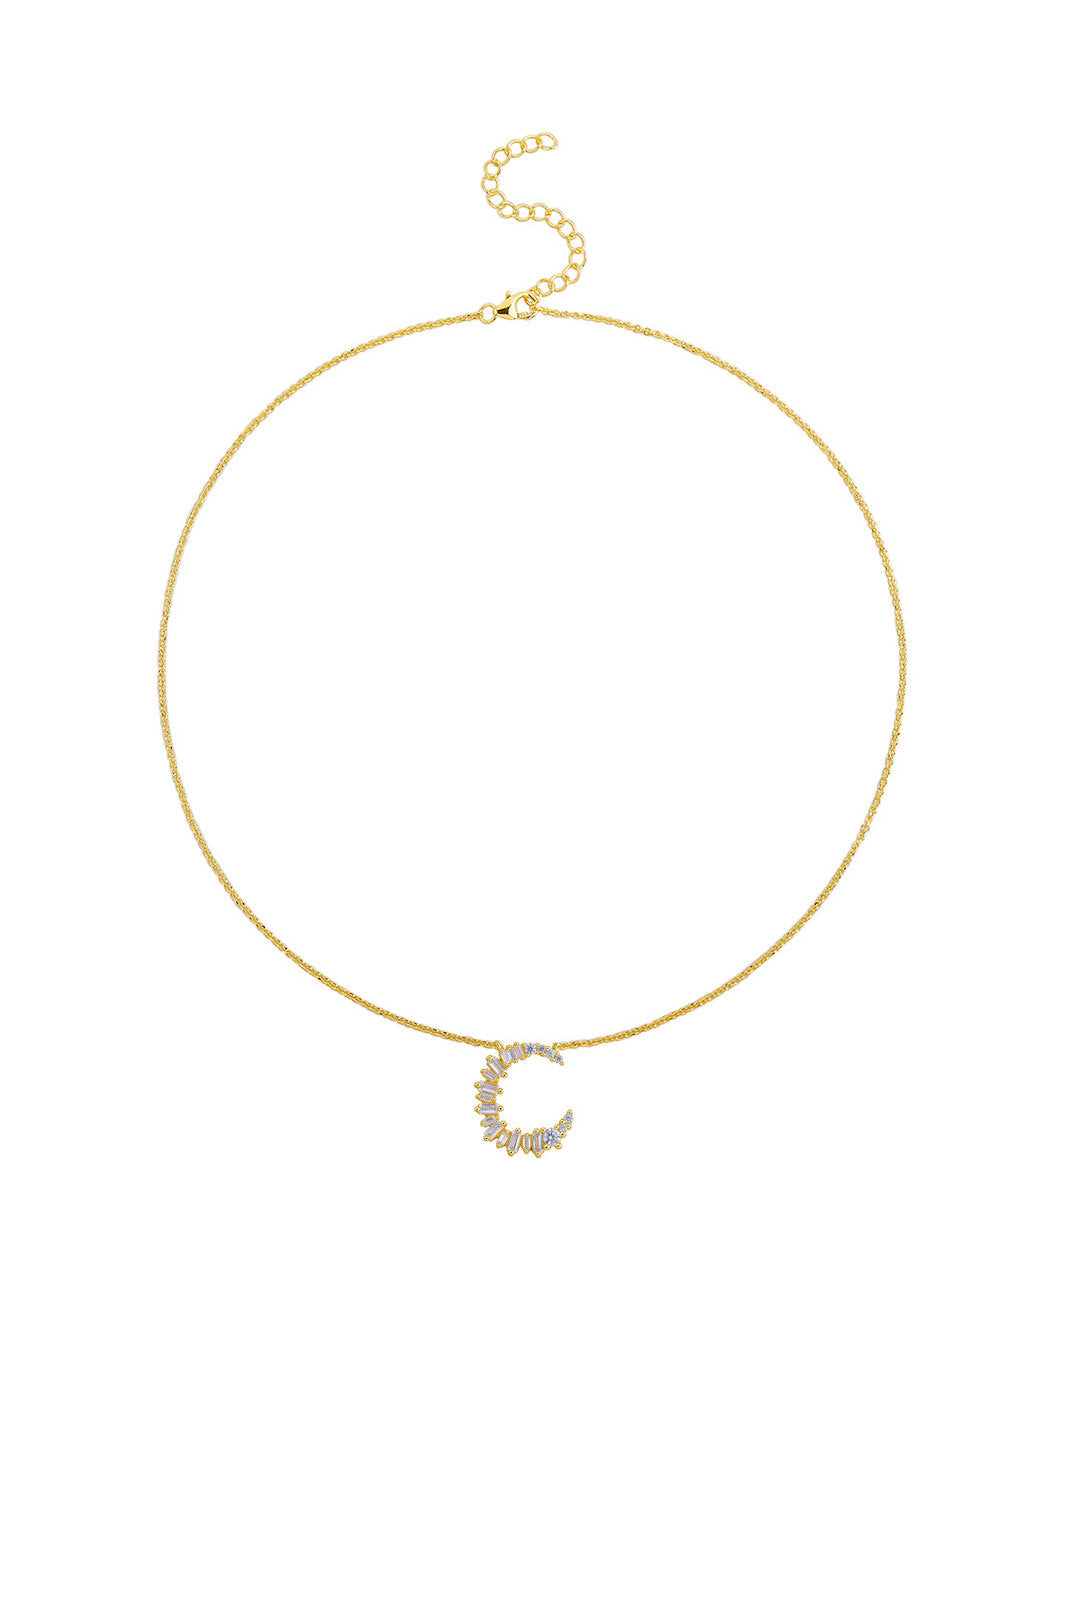 Gold Plated Sterling Silver Initial Necklace - Letter C Detail